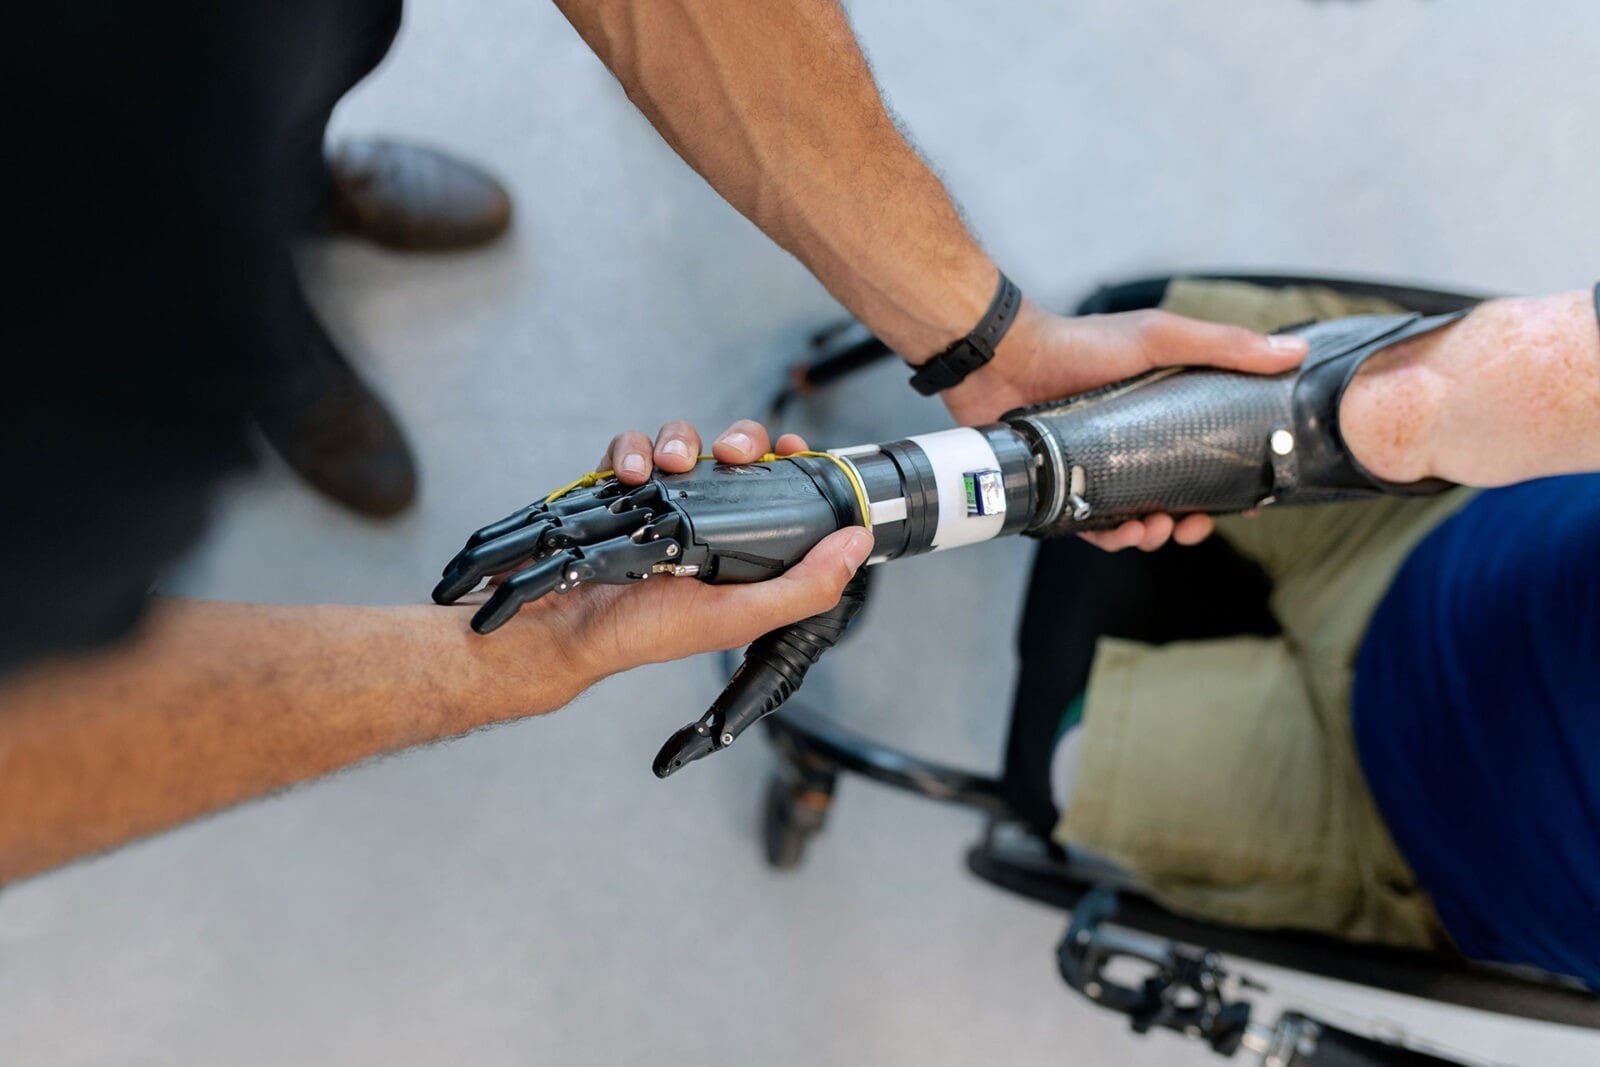 Person shaking hands with someone who uses a prosthetic aid